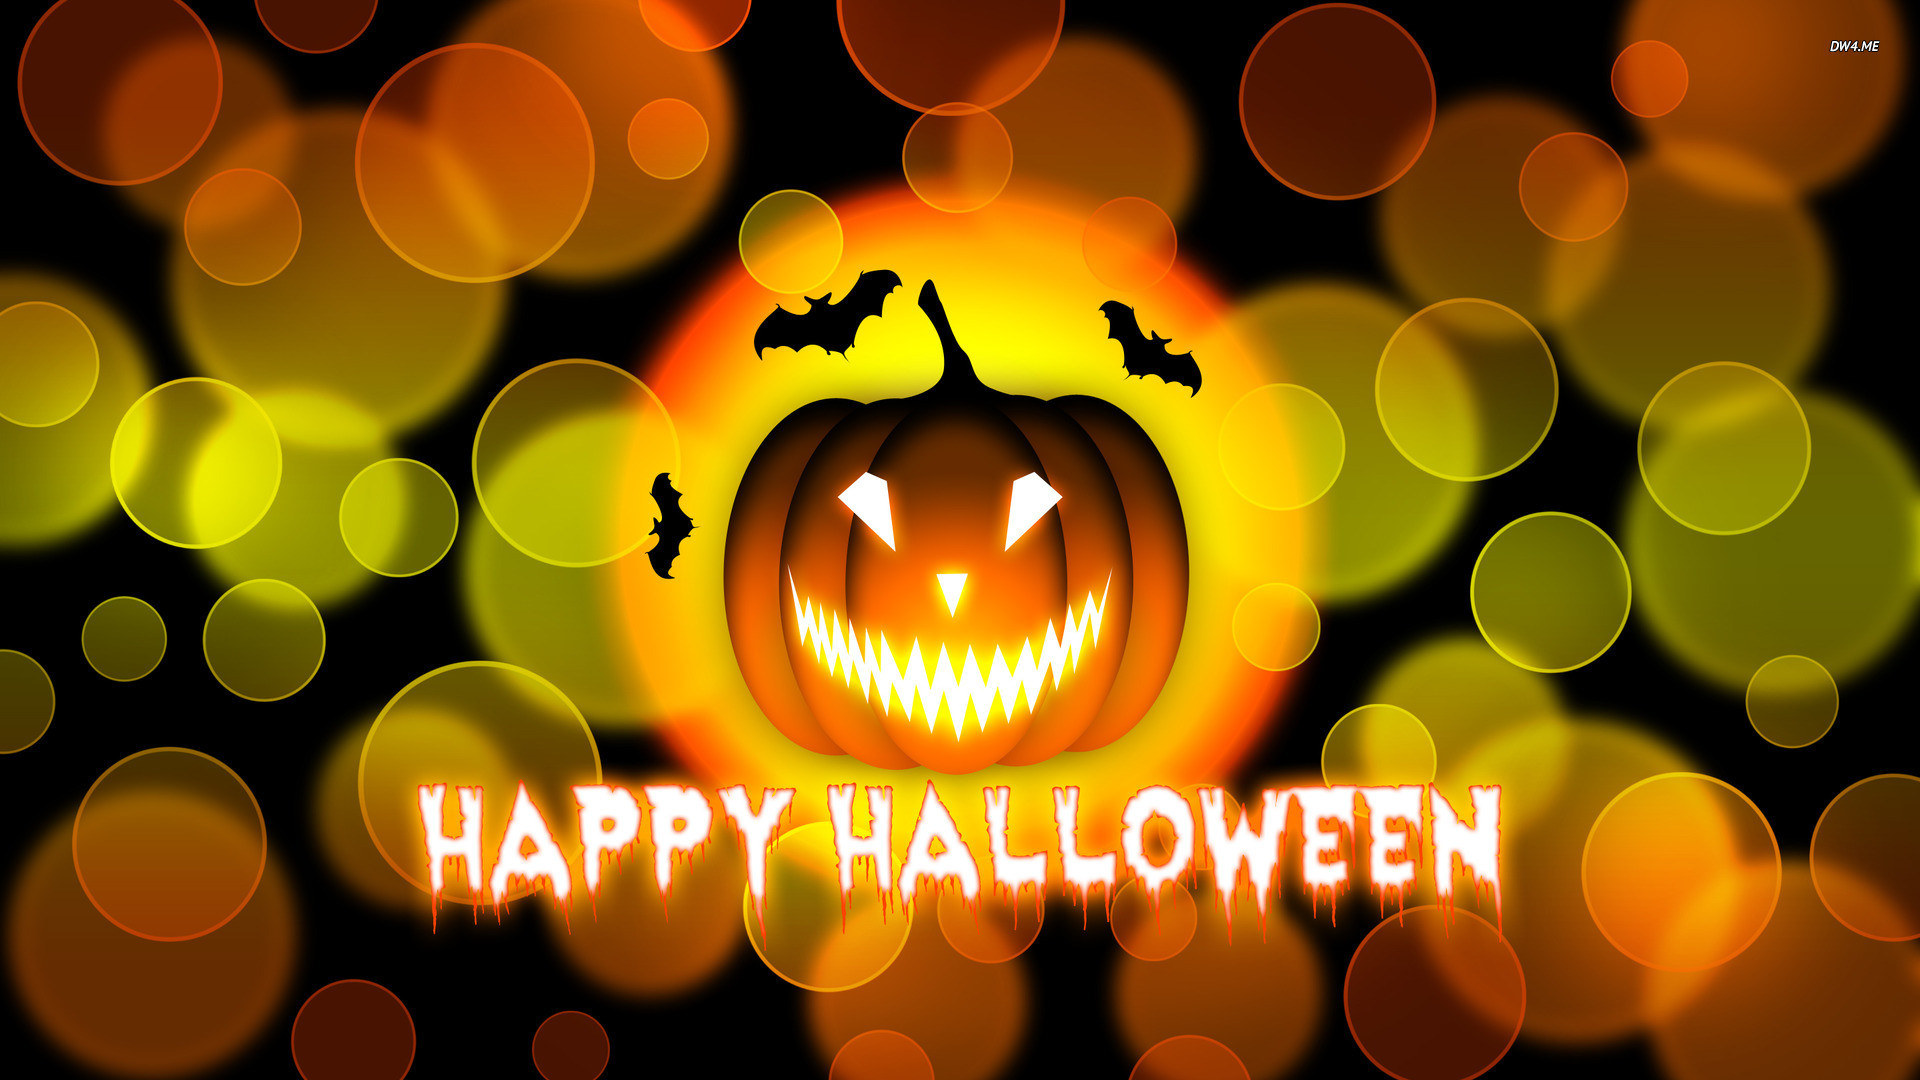 1920x1080 Full Size of Halloween: C9e5hd4 Why Isn Holiday Photo Inspirations Happy  Wallpaper Wallpapers Browse Considered ...